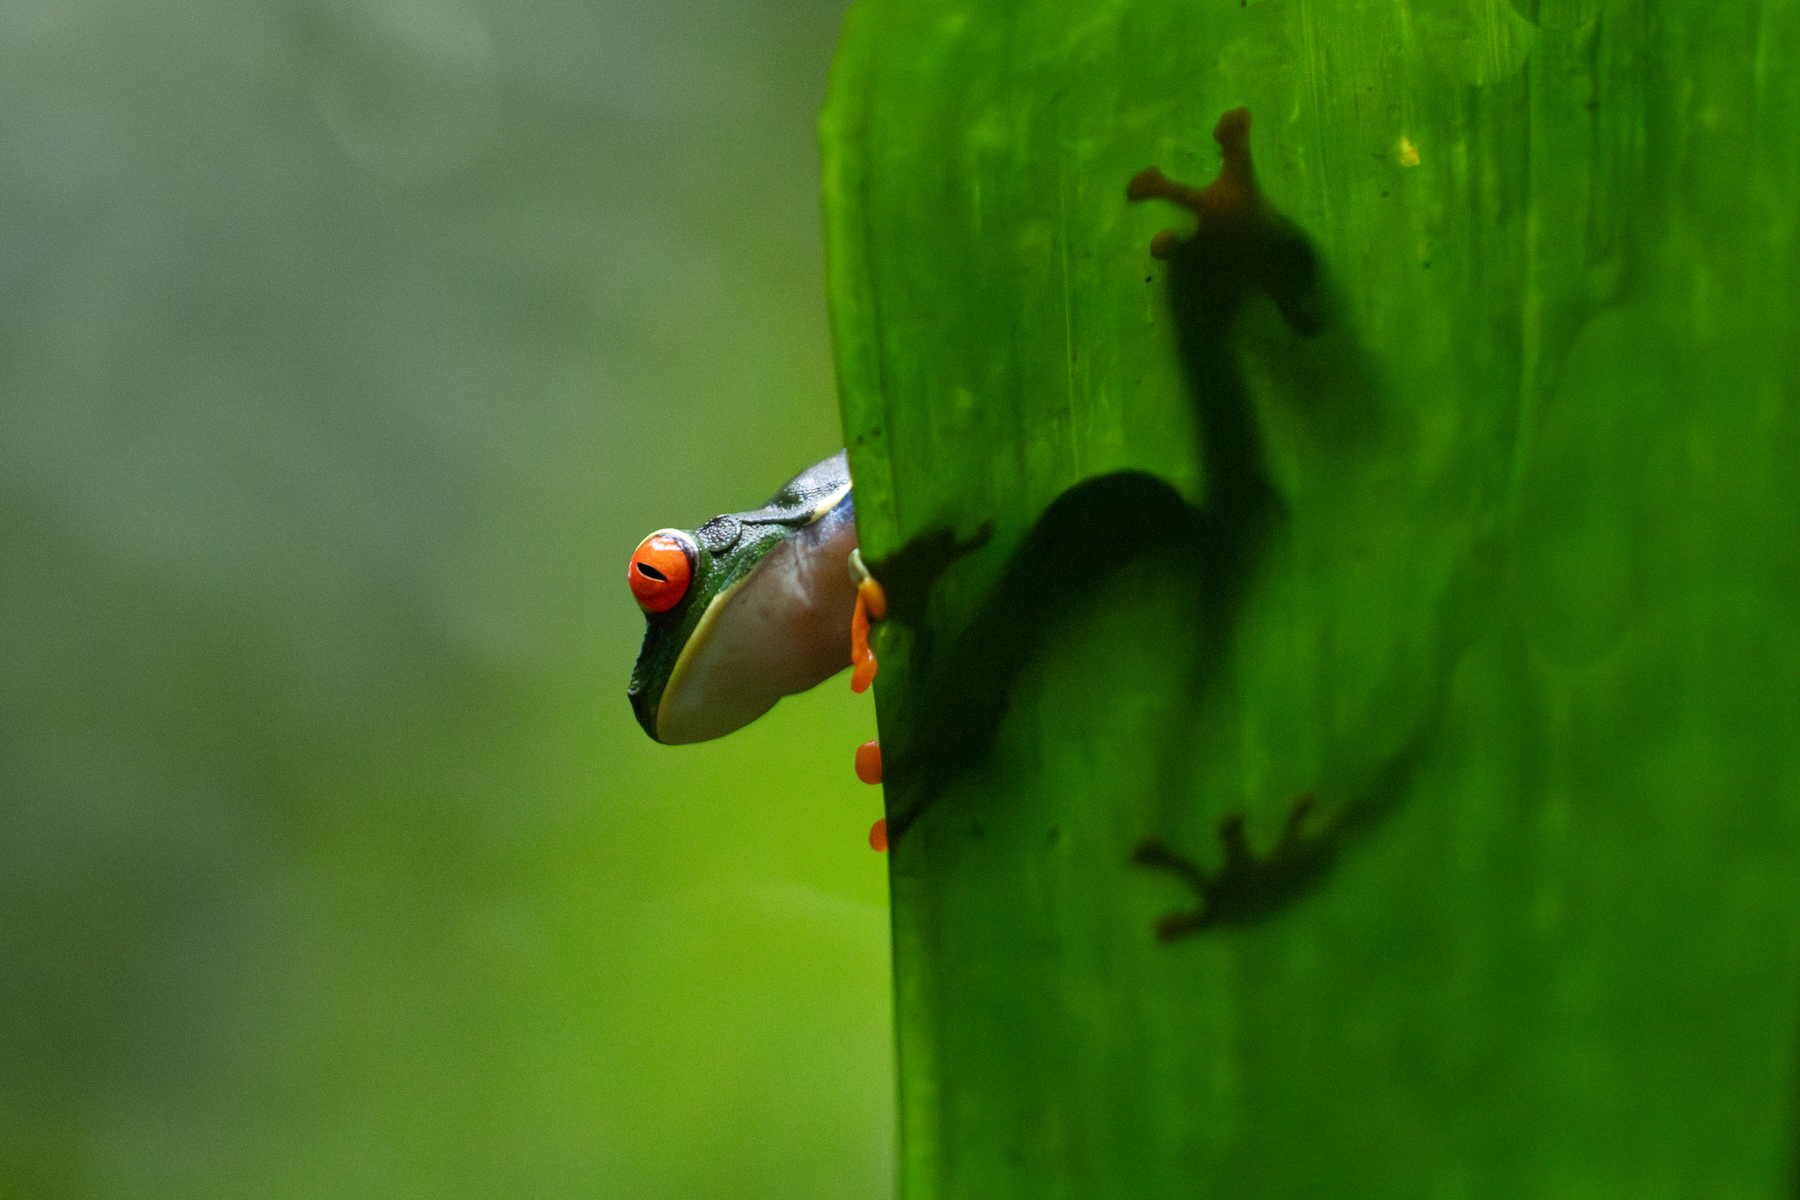 A Red-eyed Tree Frog peers over the edge of a rainforest leaf (image by Inger Vandyke)